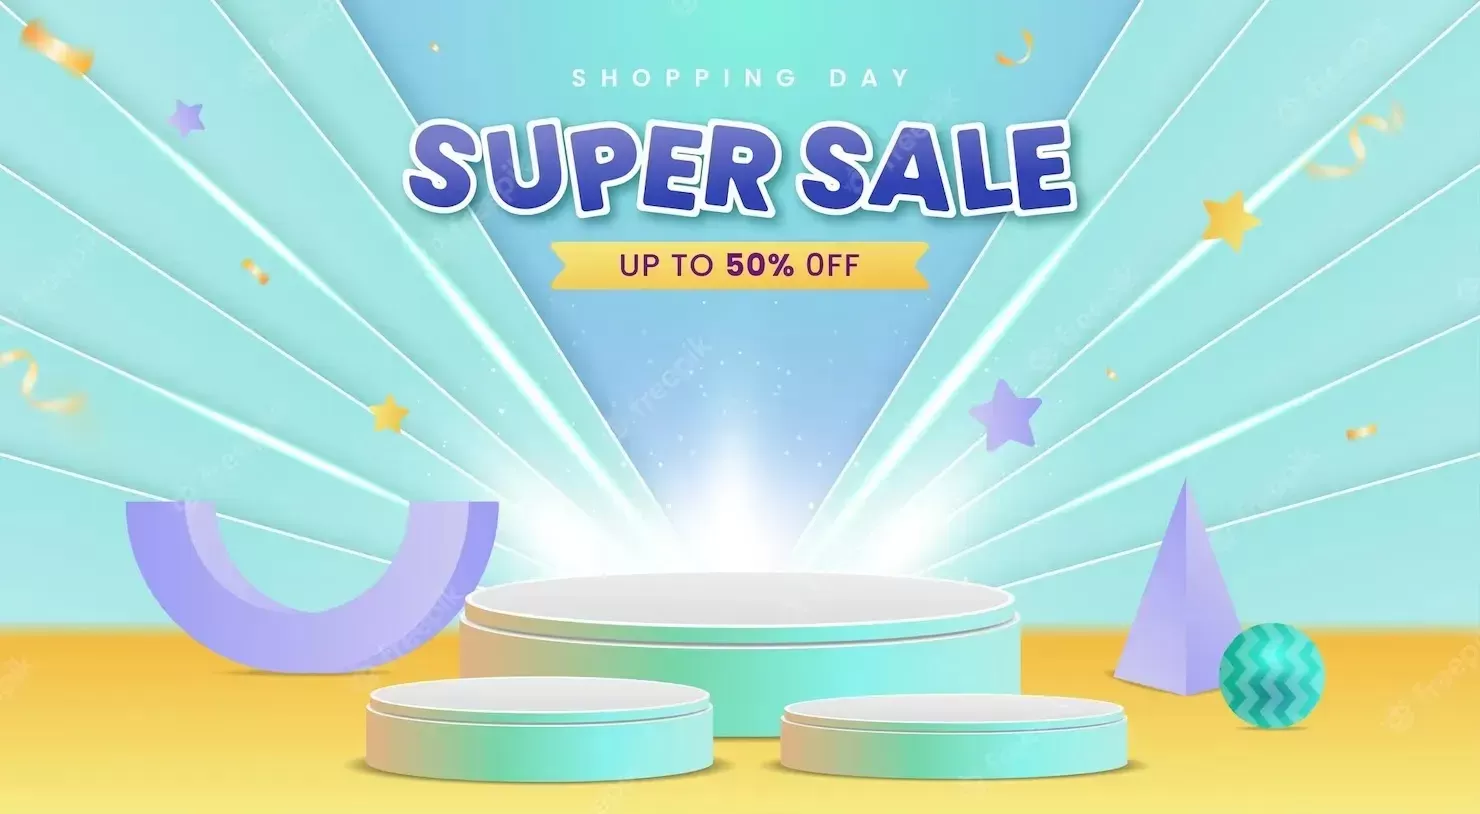 Shopping day sale banner template design